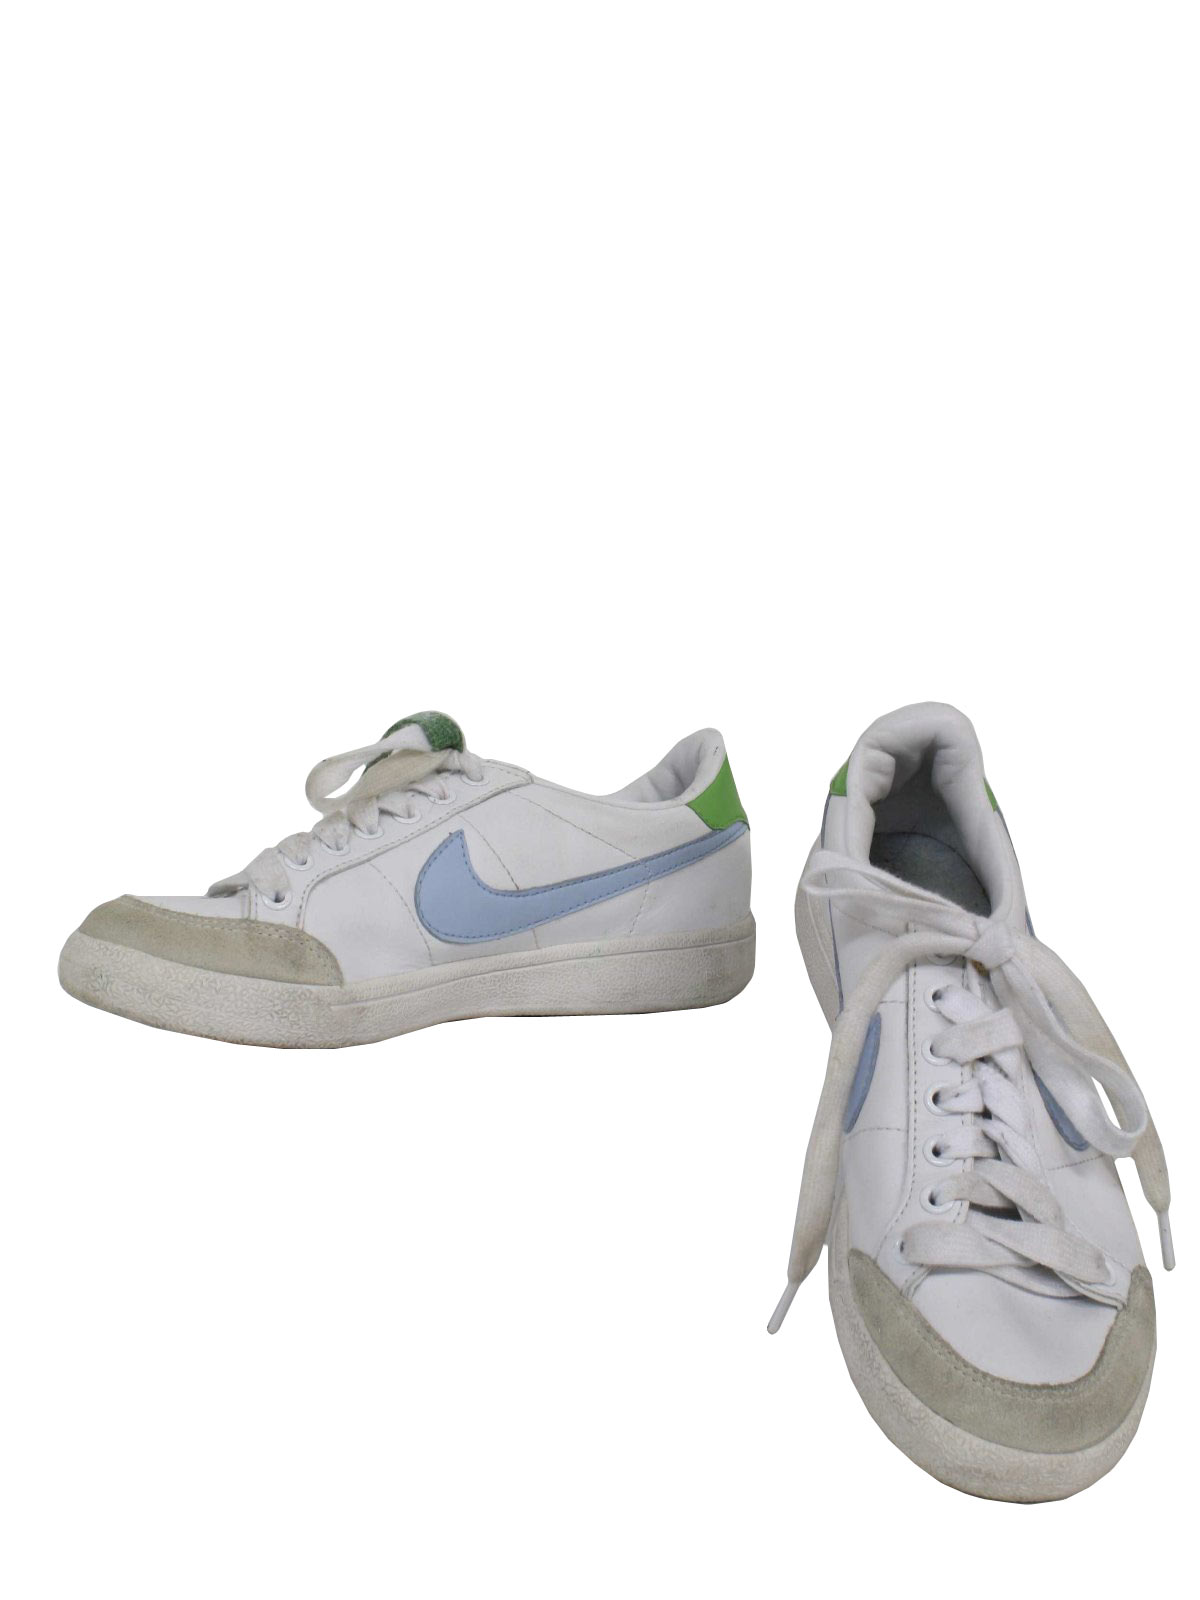 90s style nike shoes